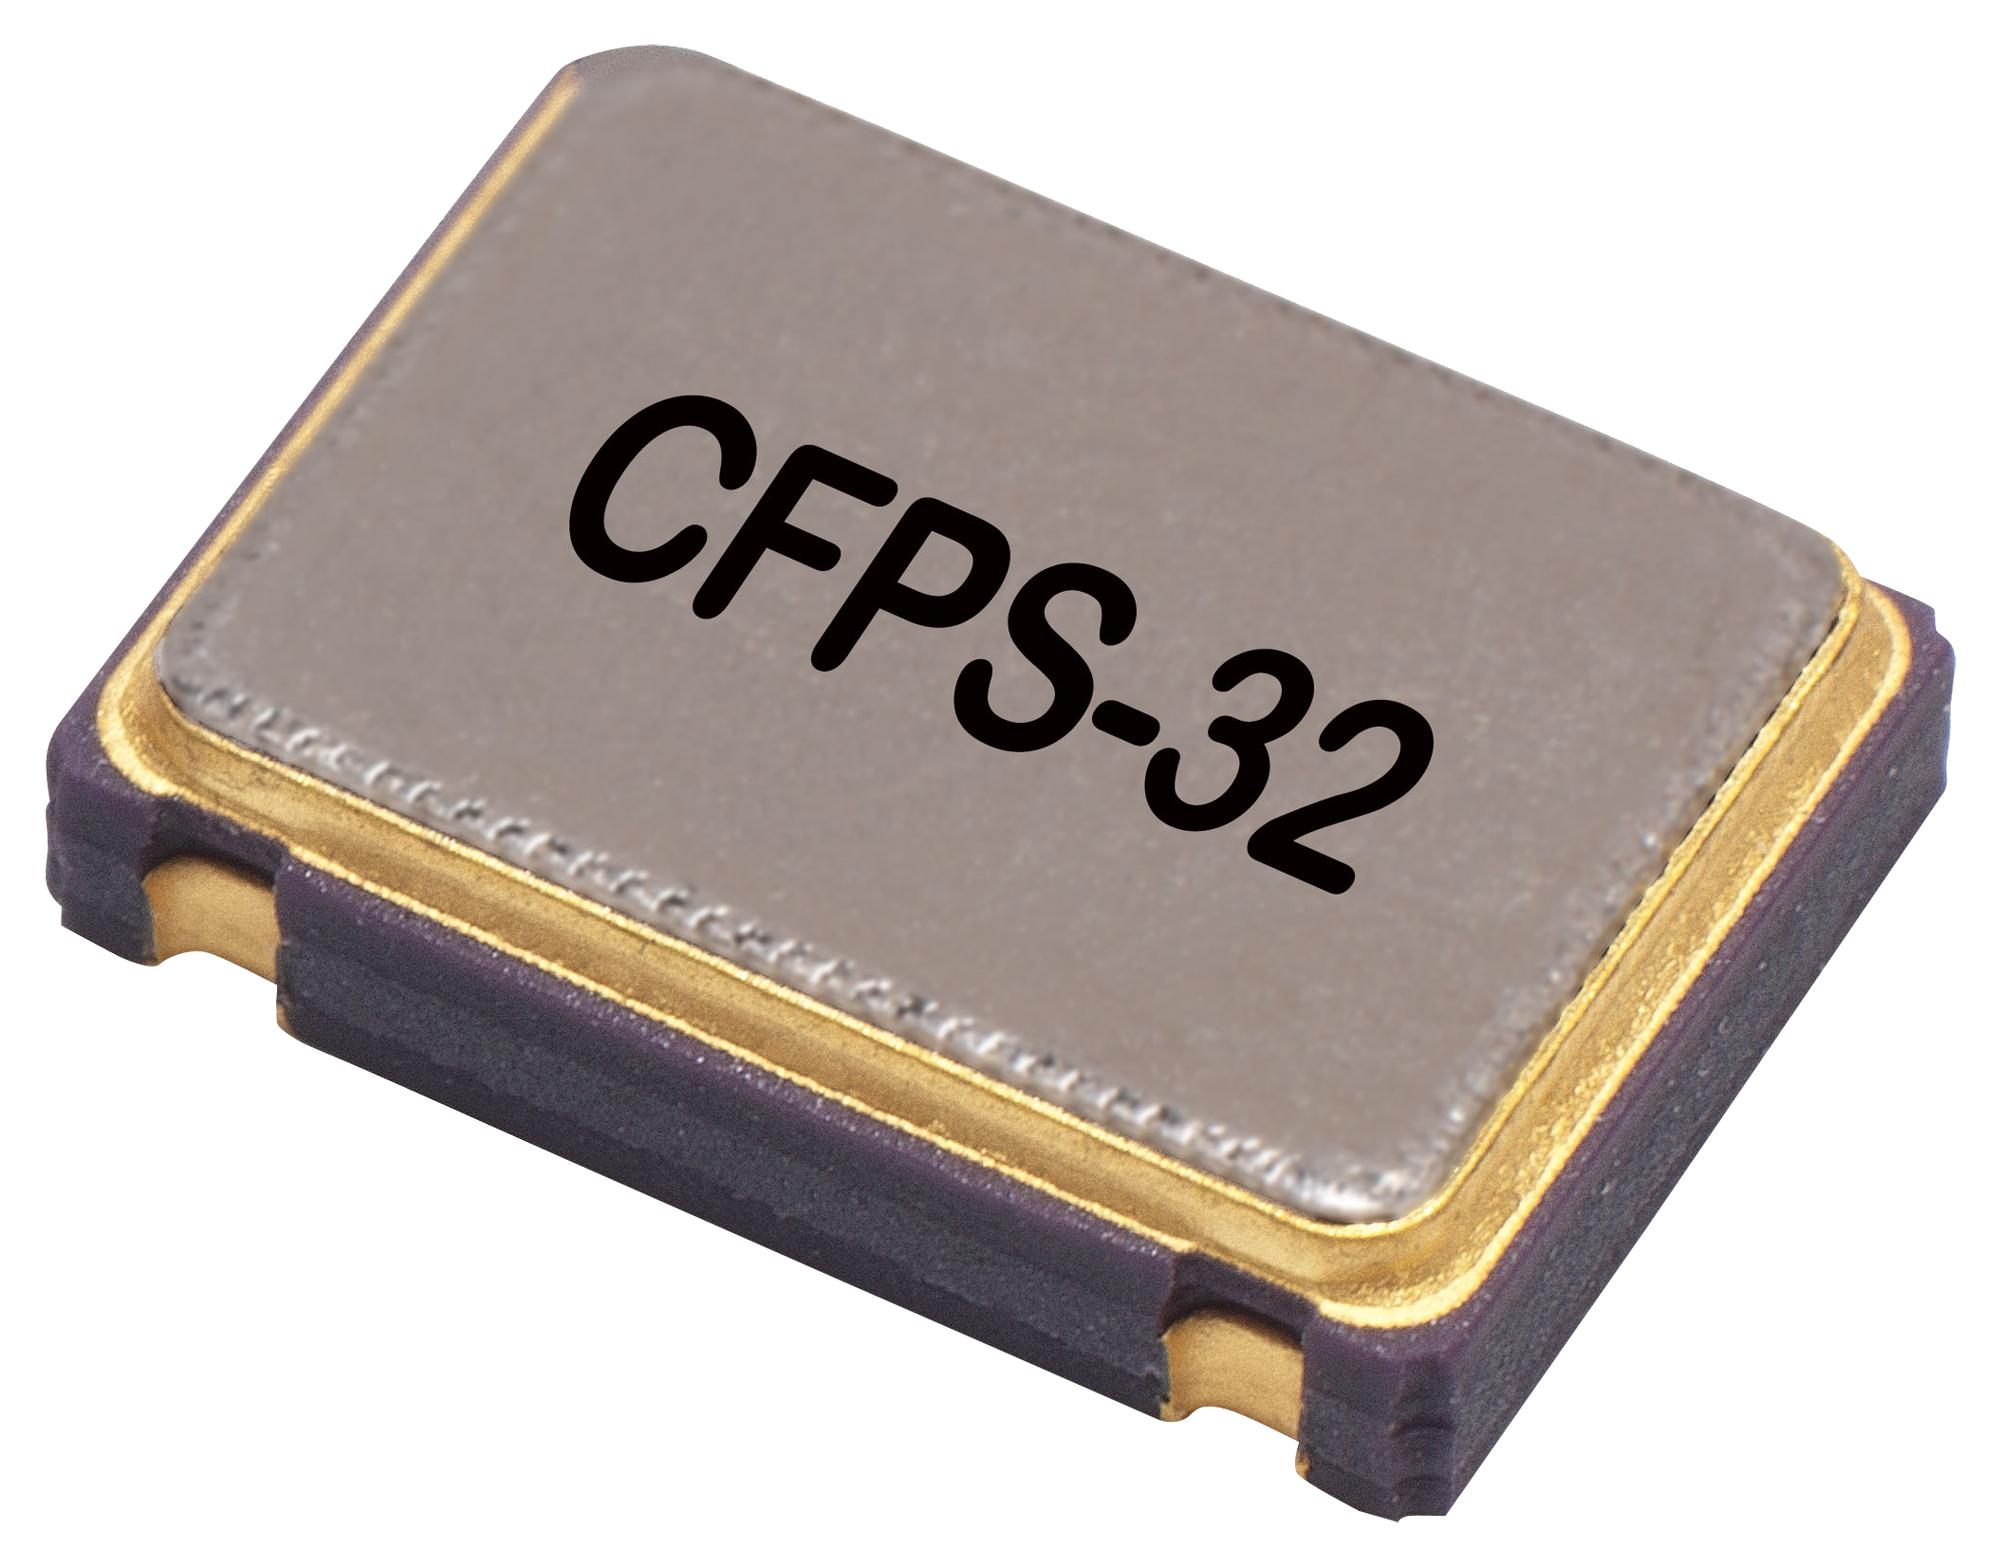 LFSPXO025917 CRYSTAL OSCILLATOR, SMD, 40MHZ IQD FREQUENCY PRODUCTS